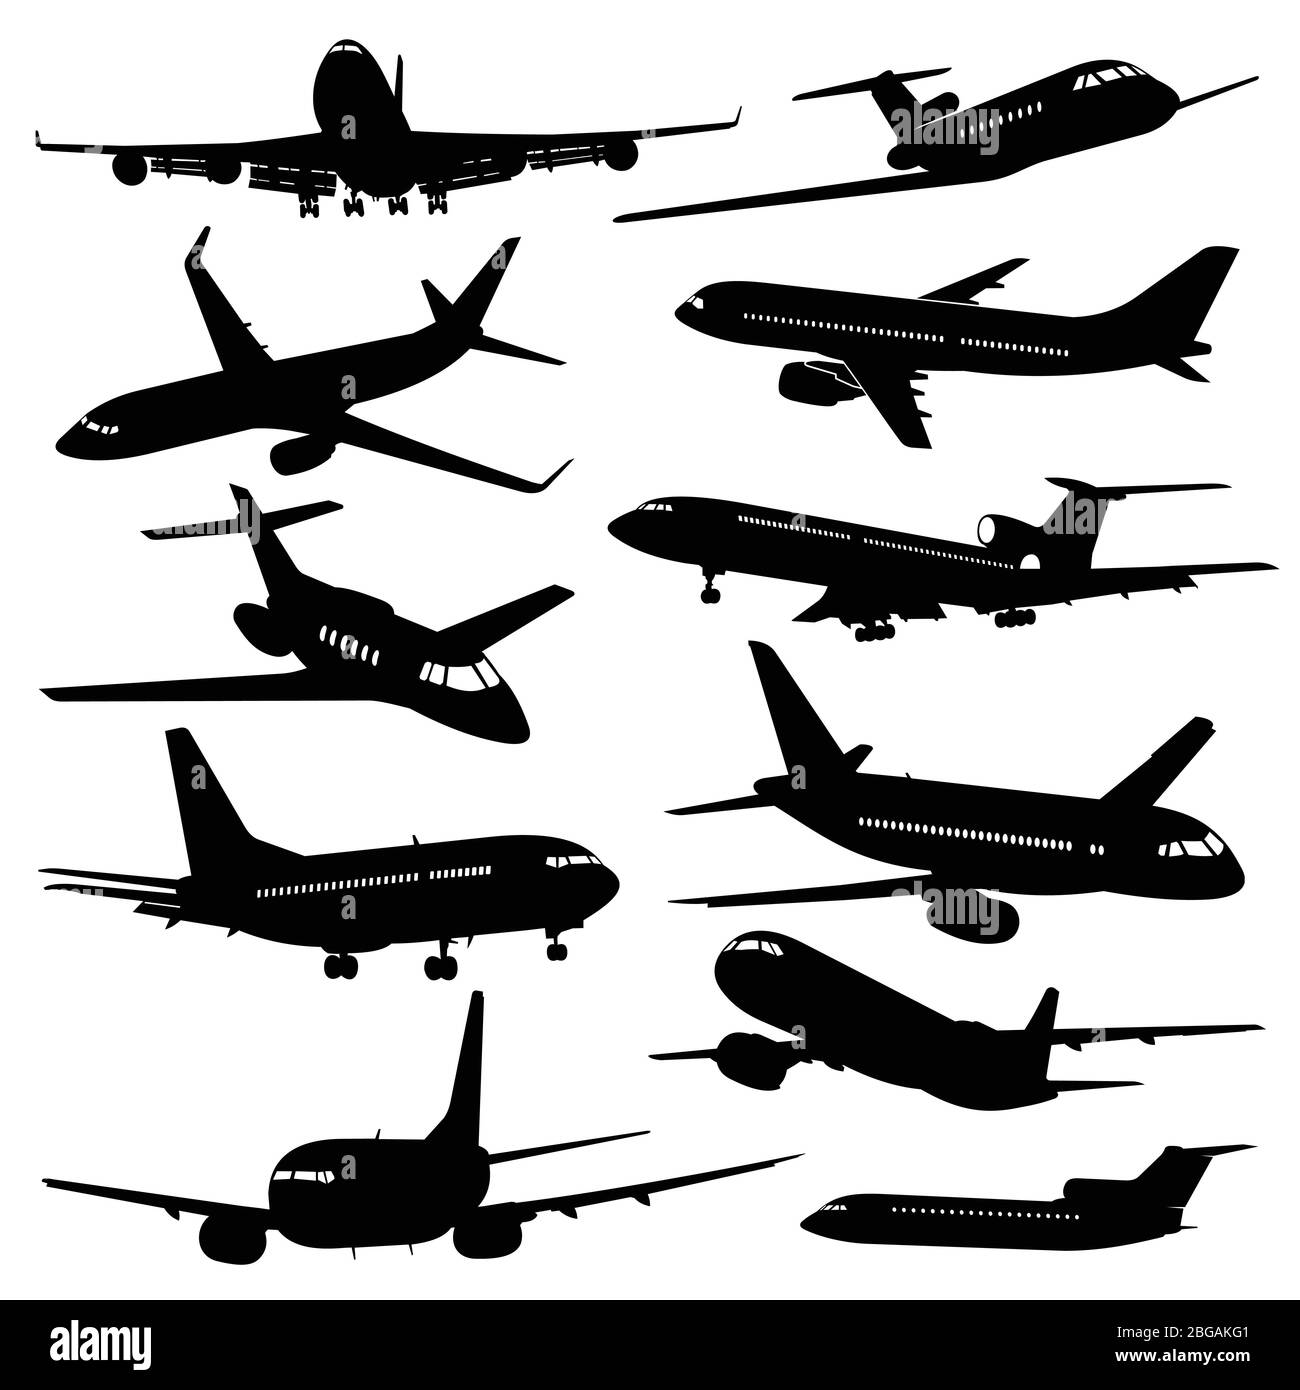 Flight aviation vector icons. Airplane black silhouettes in sky. Illustration of airplane flight, aviation and aircraft Stock Vector